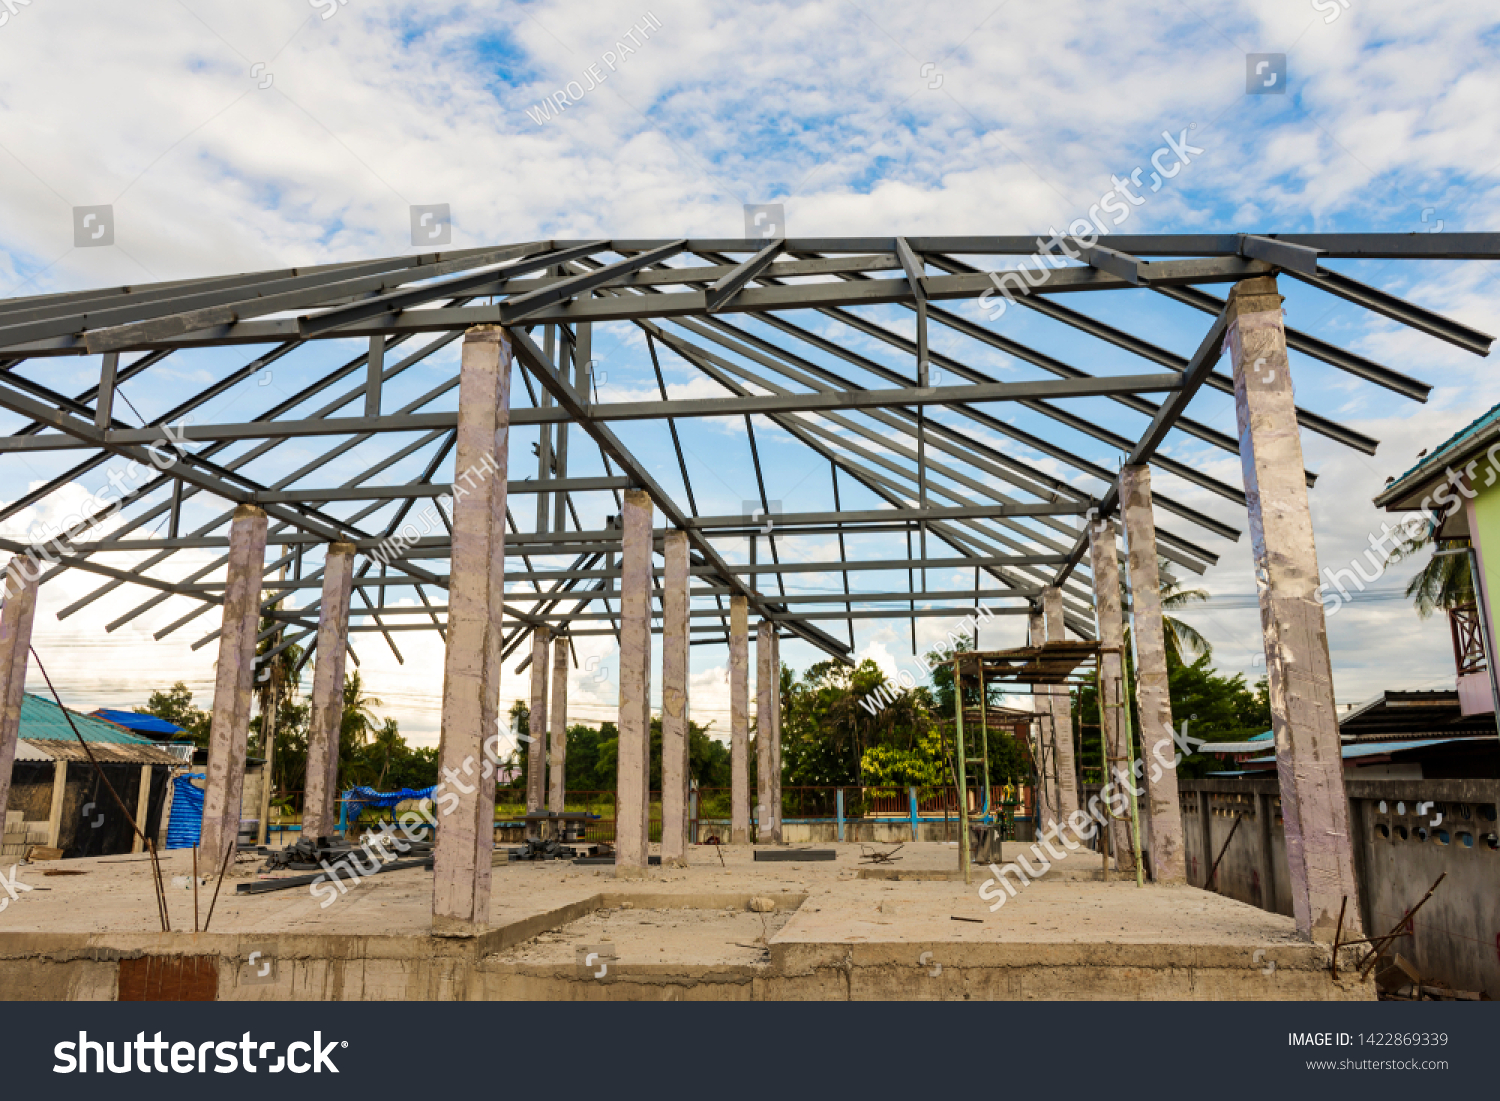 Structure of houses, pillars and concrete floors, roof structures using steel in construction #1422869339